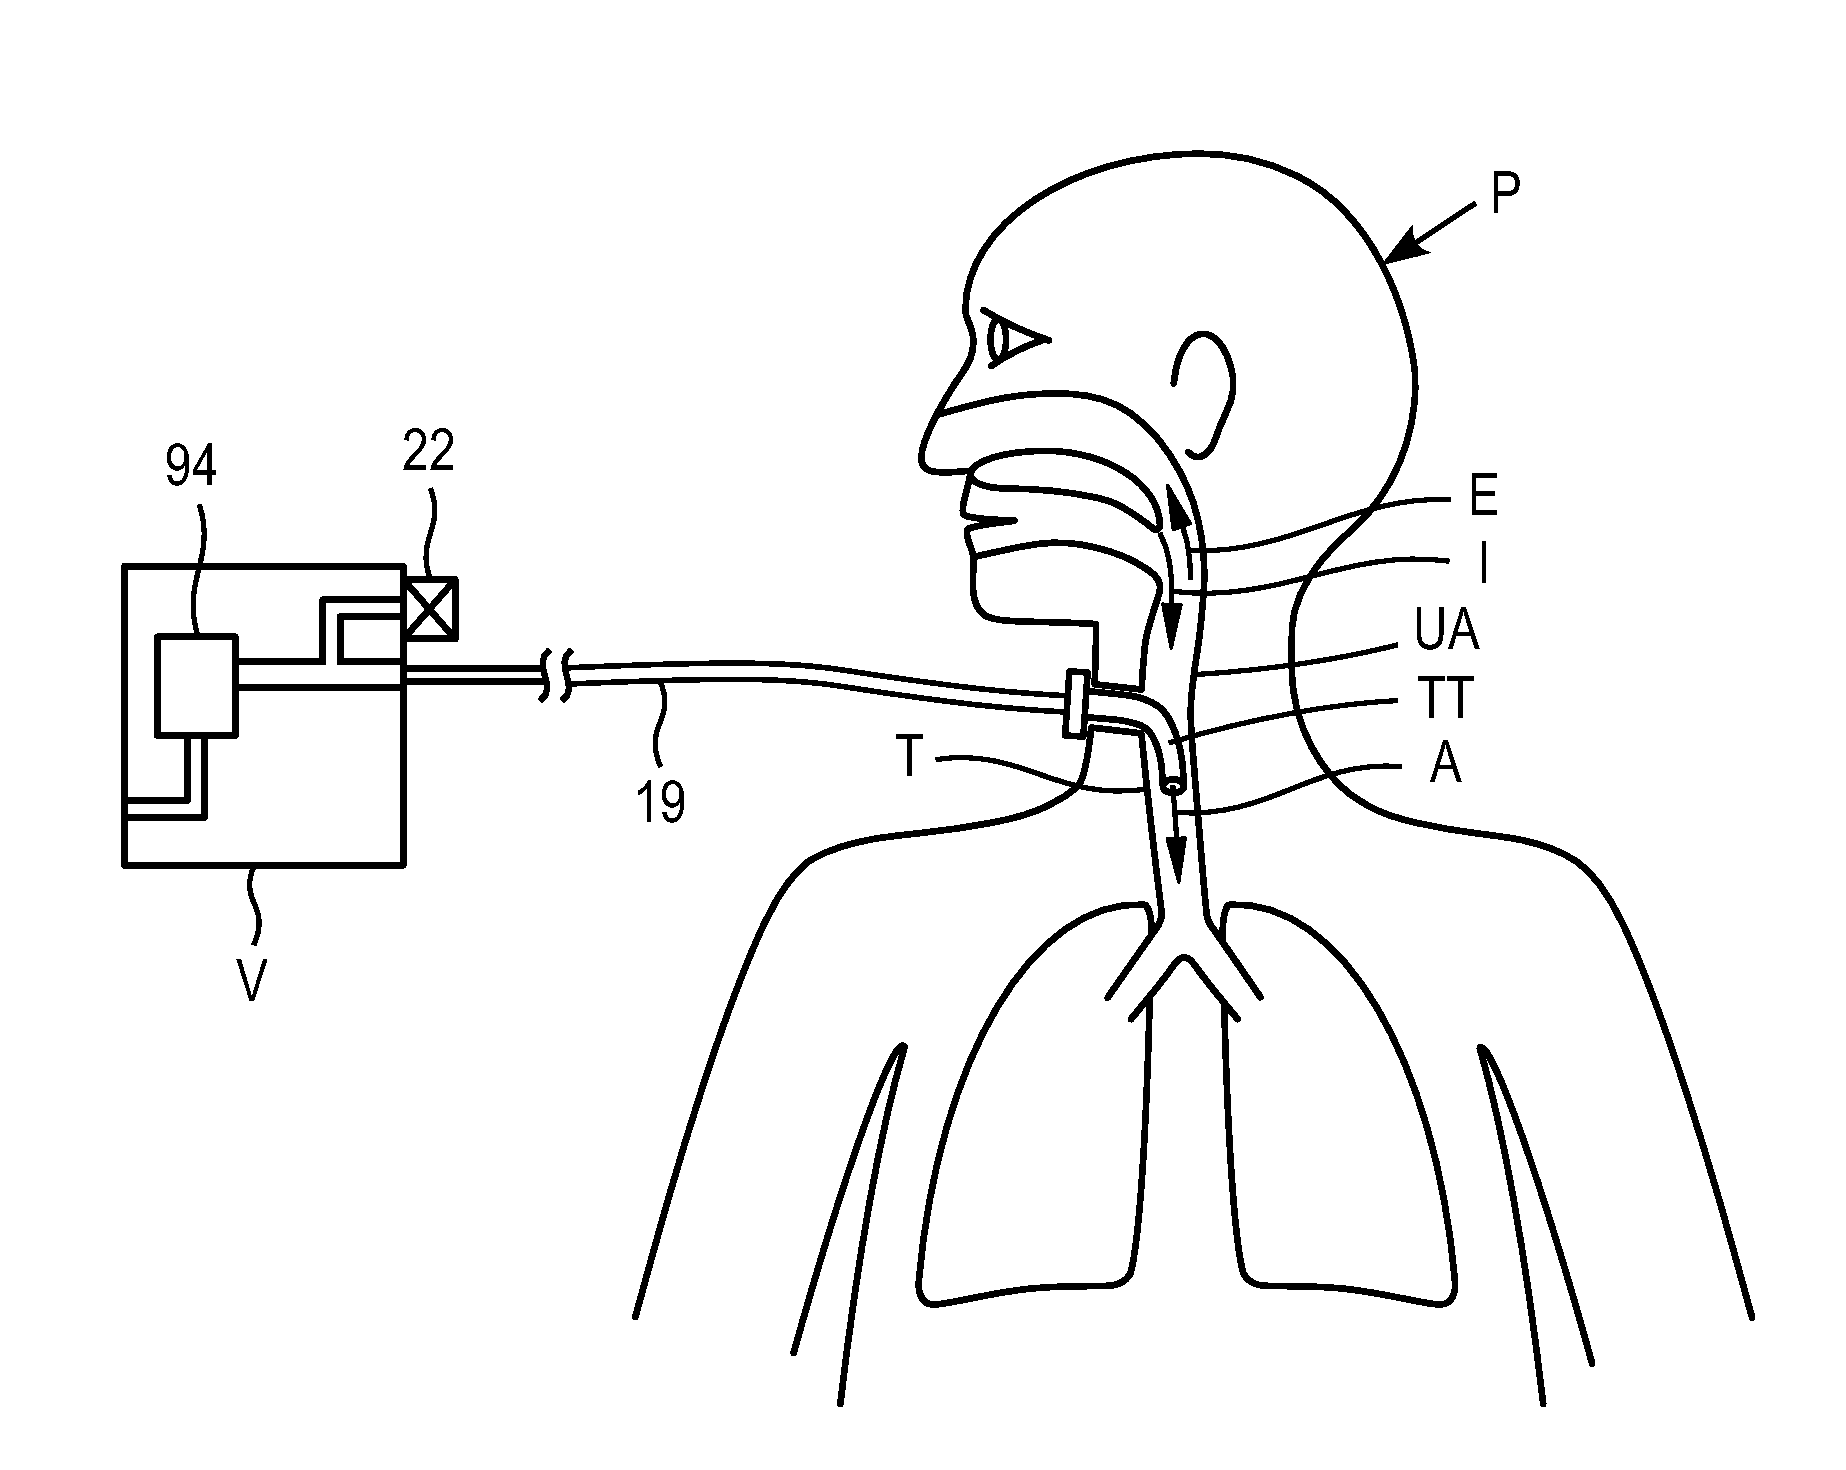 Methods and devices for providing inspiratory and expiratory flow relief during ventilation therapy